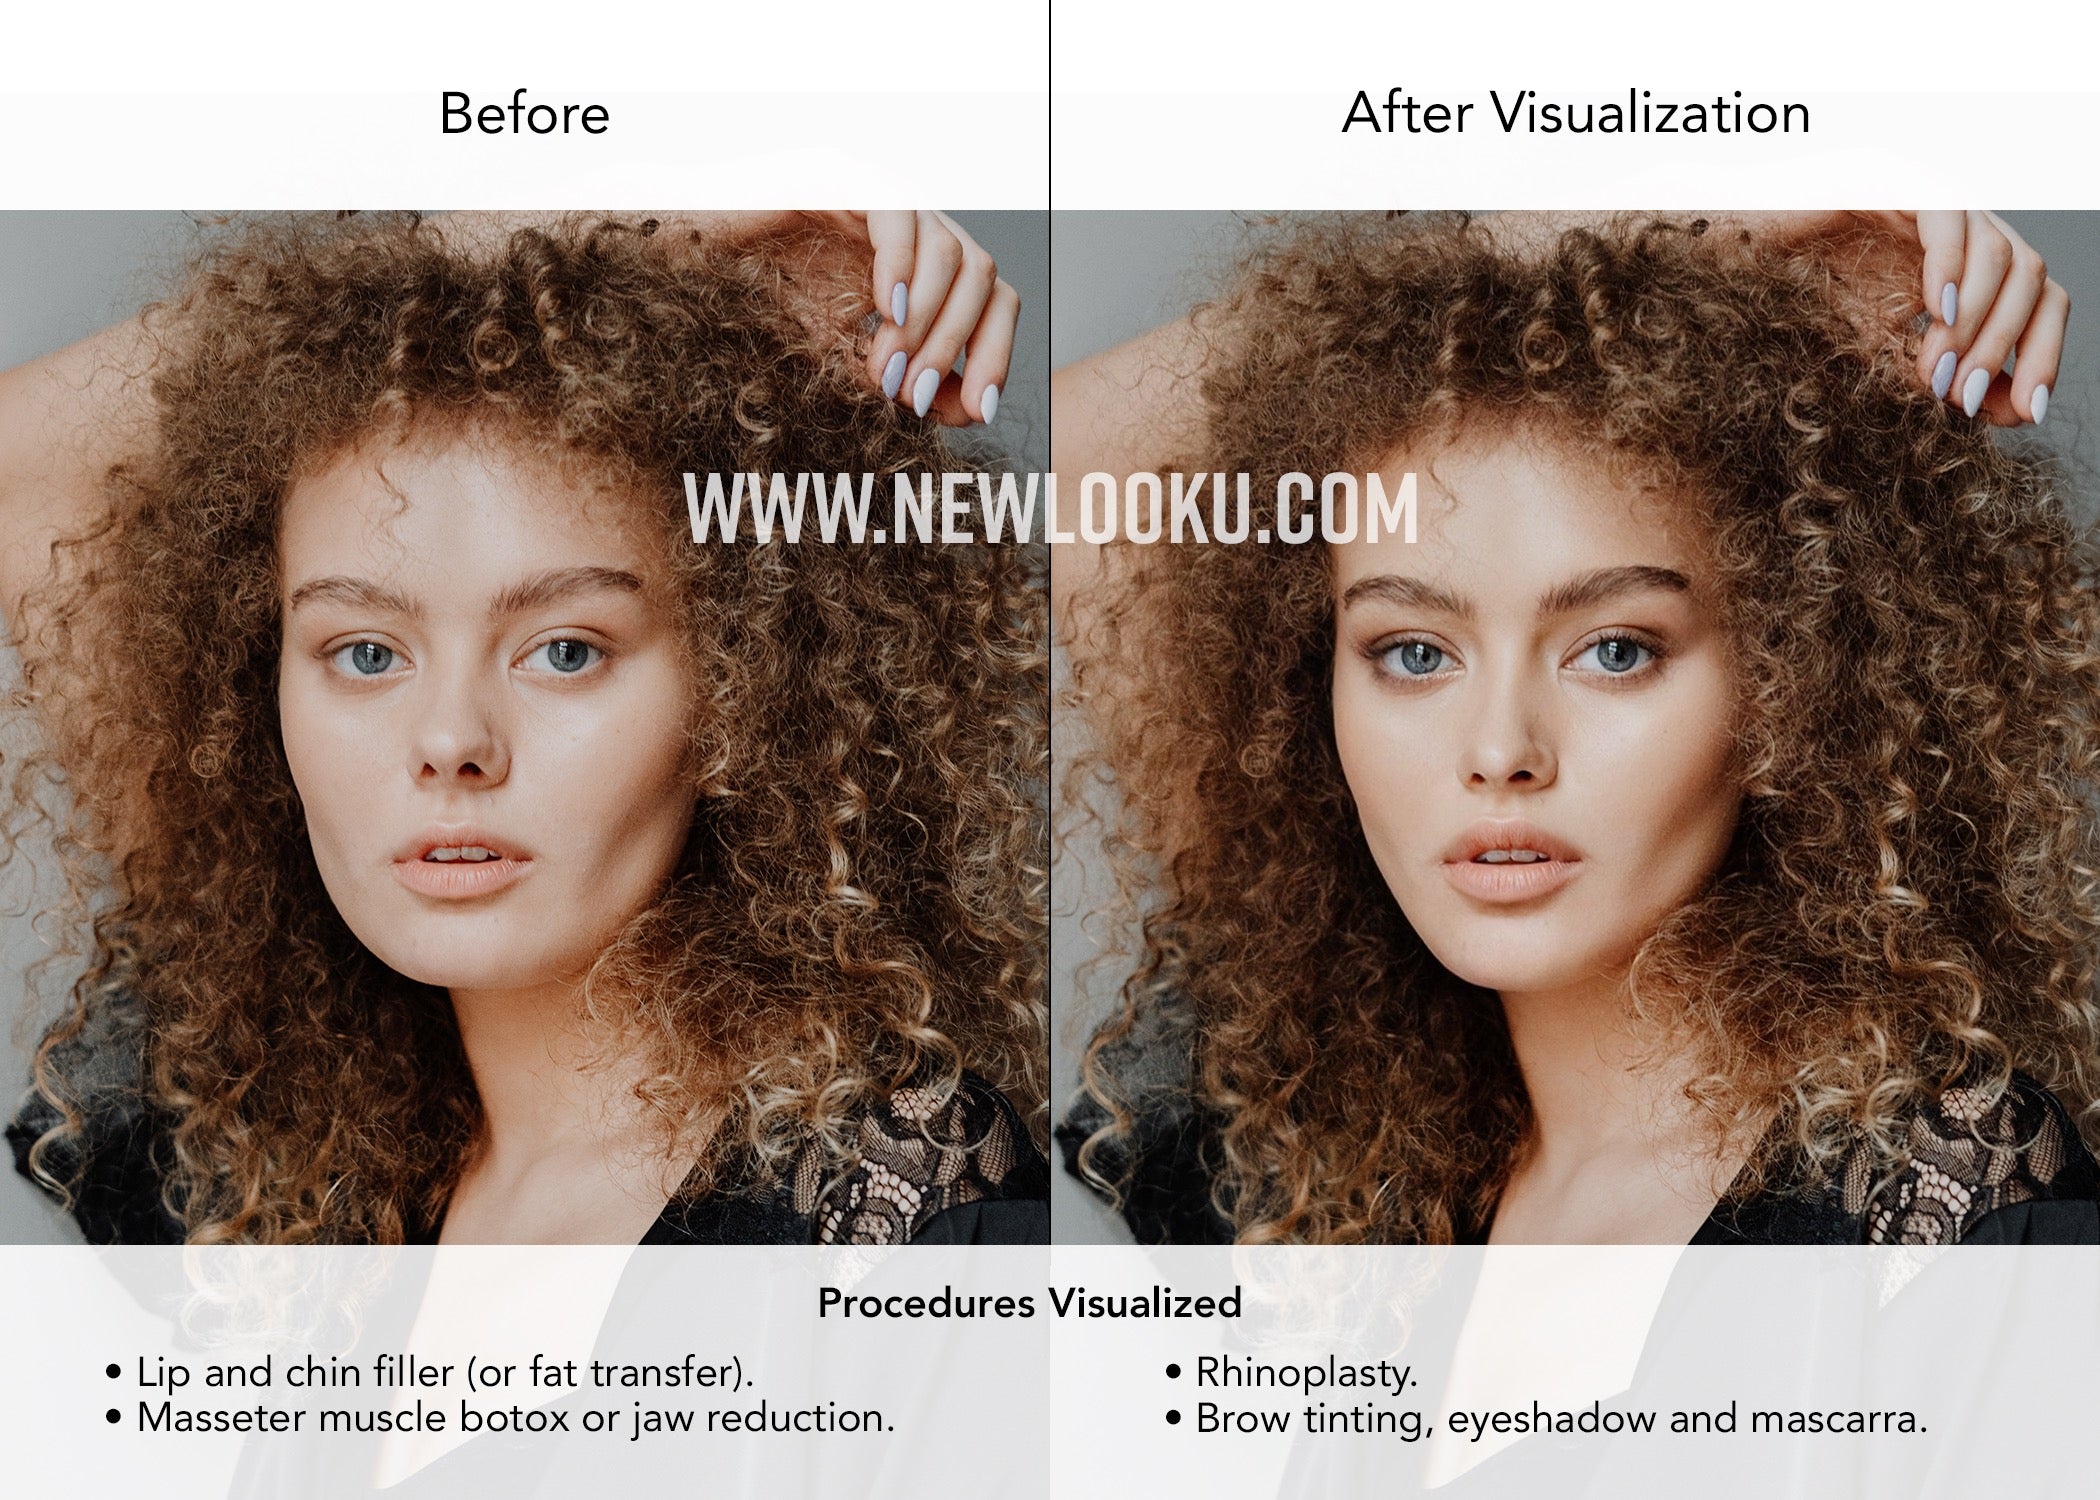 Young Female Plastic Surgery Simulation Before & After Photo.